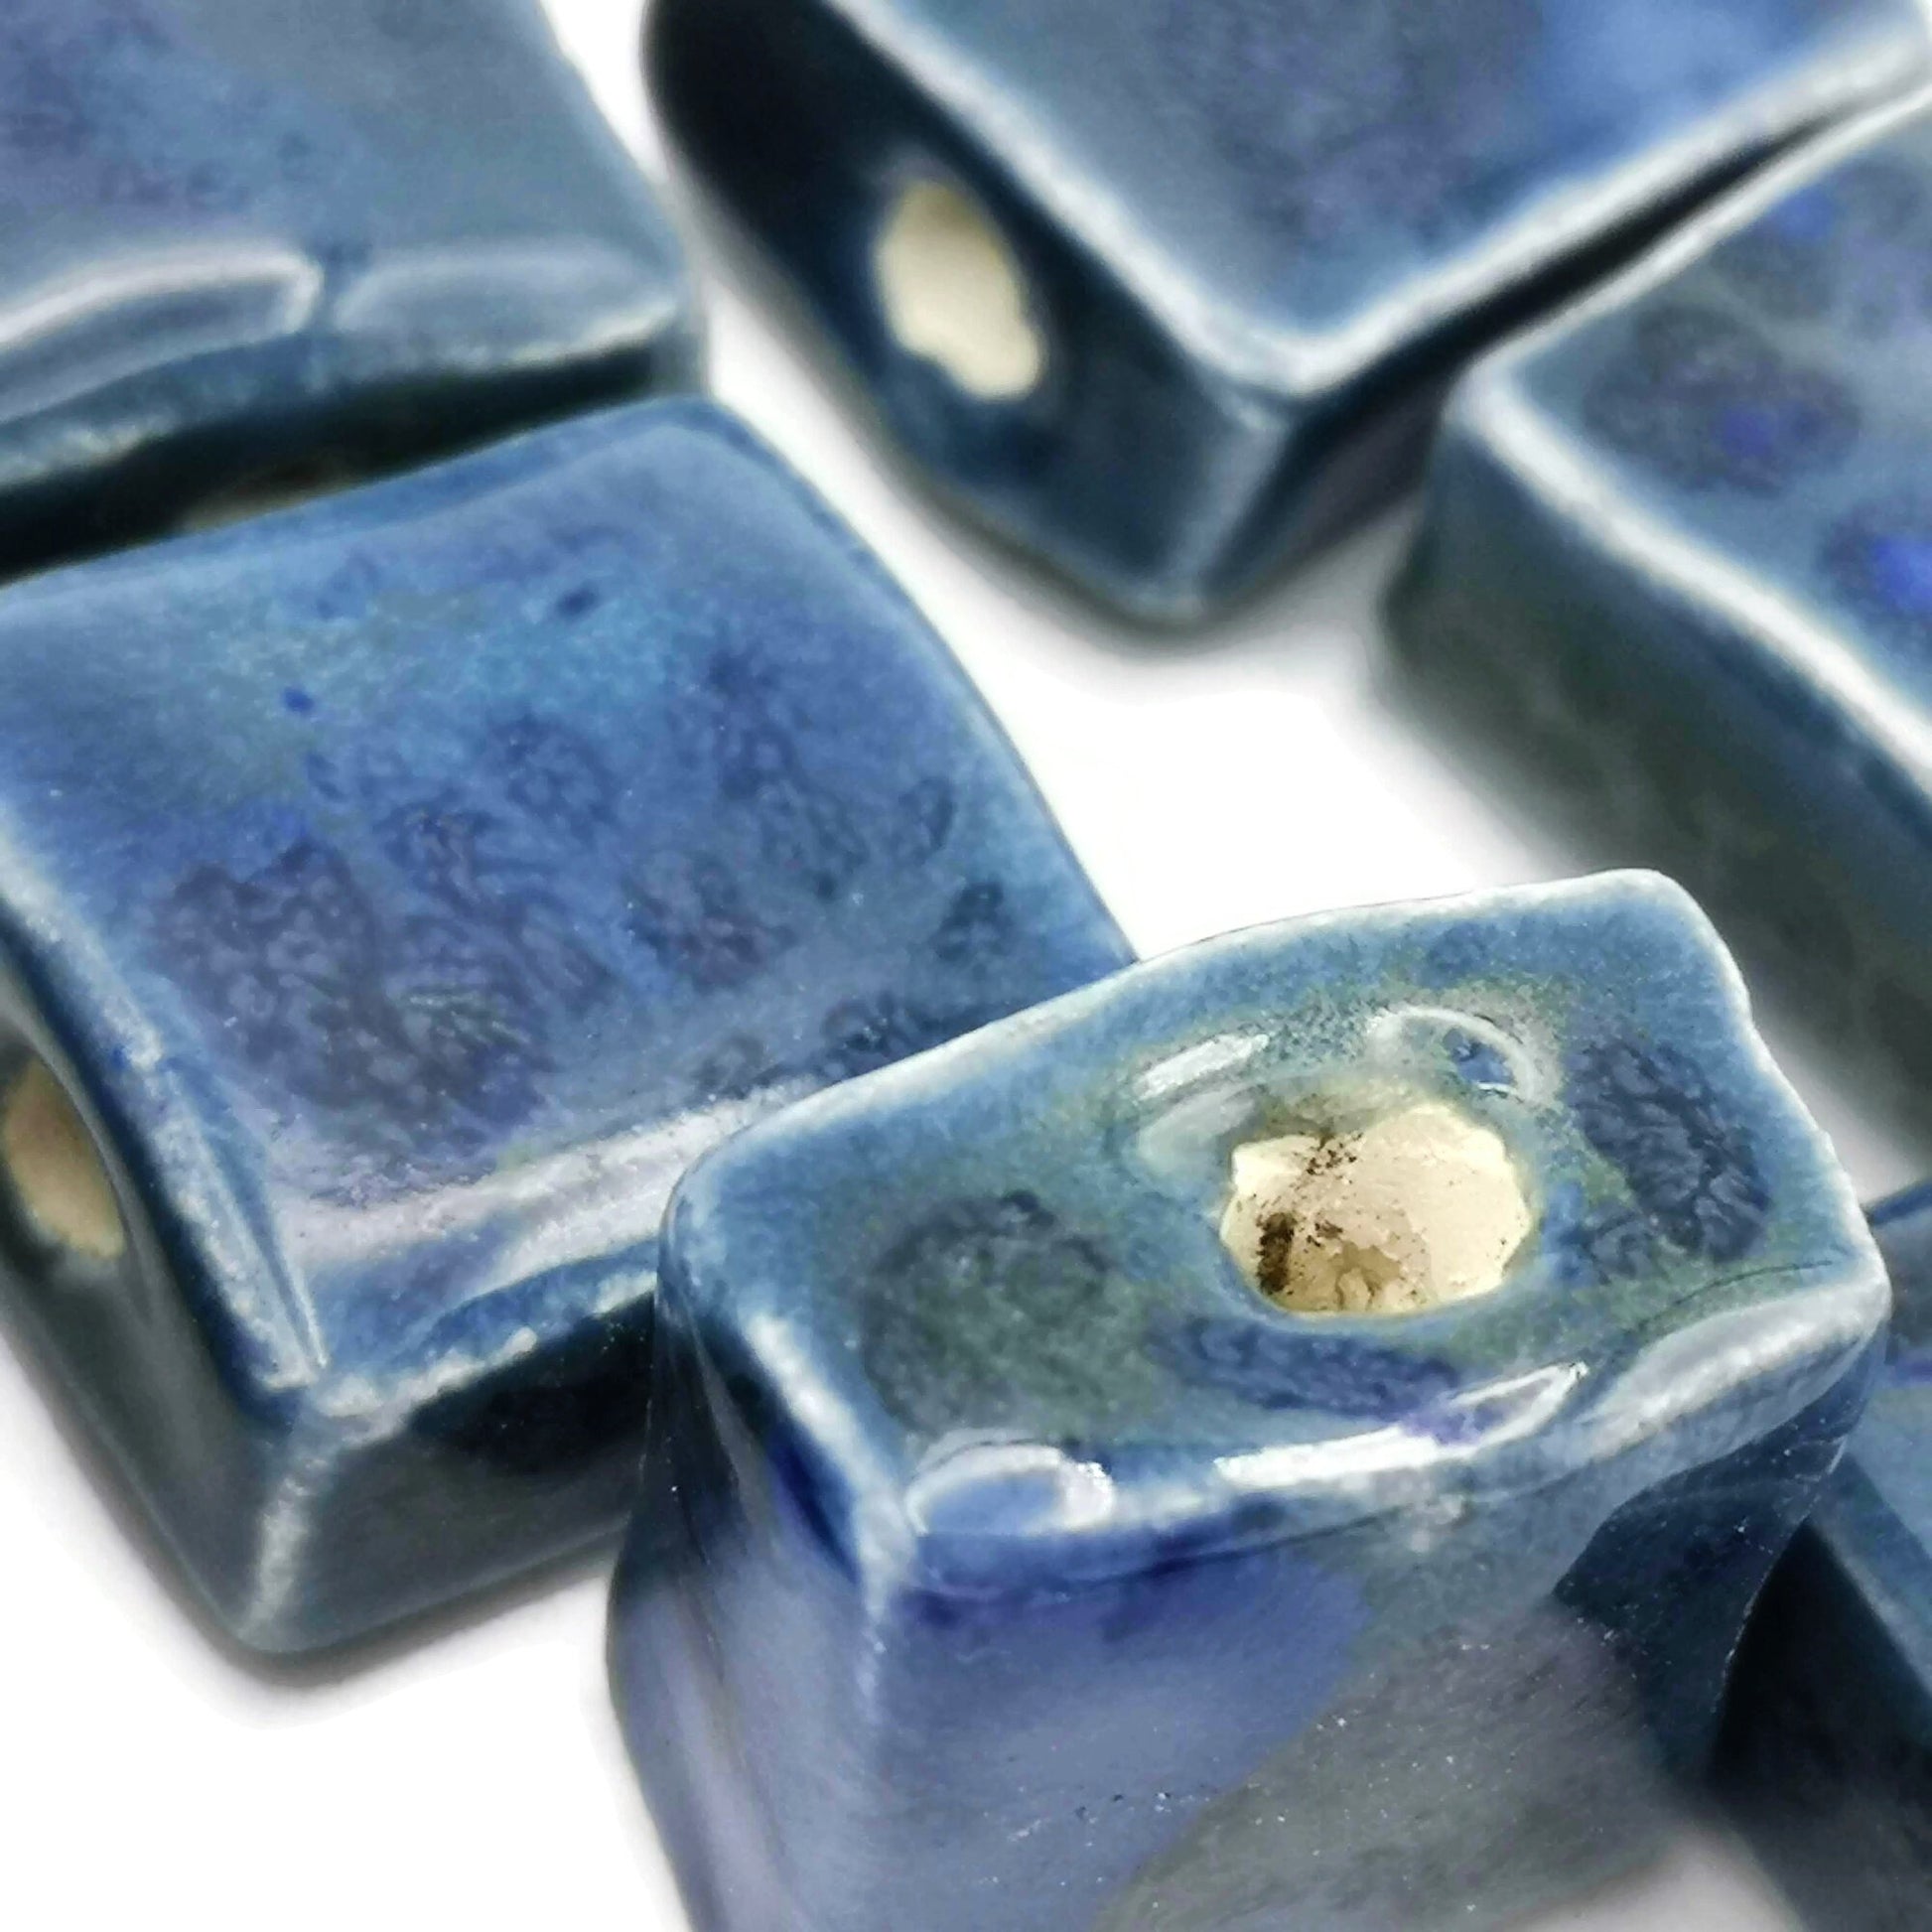 8Pc Flat Square Beads, Handmade Ceramic Beads, Blue Craft Beads Assorted Decorative Beads For Jewelry Making, Most Sold Items - Ceramica Ana Rafael